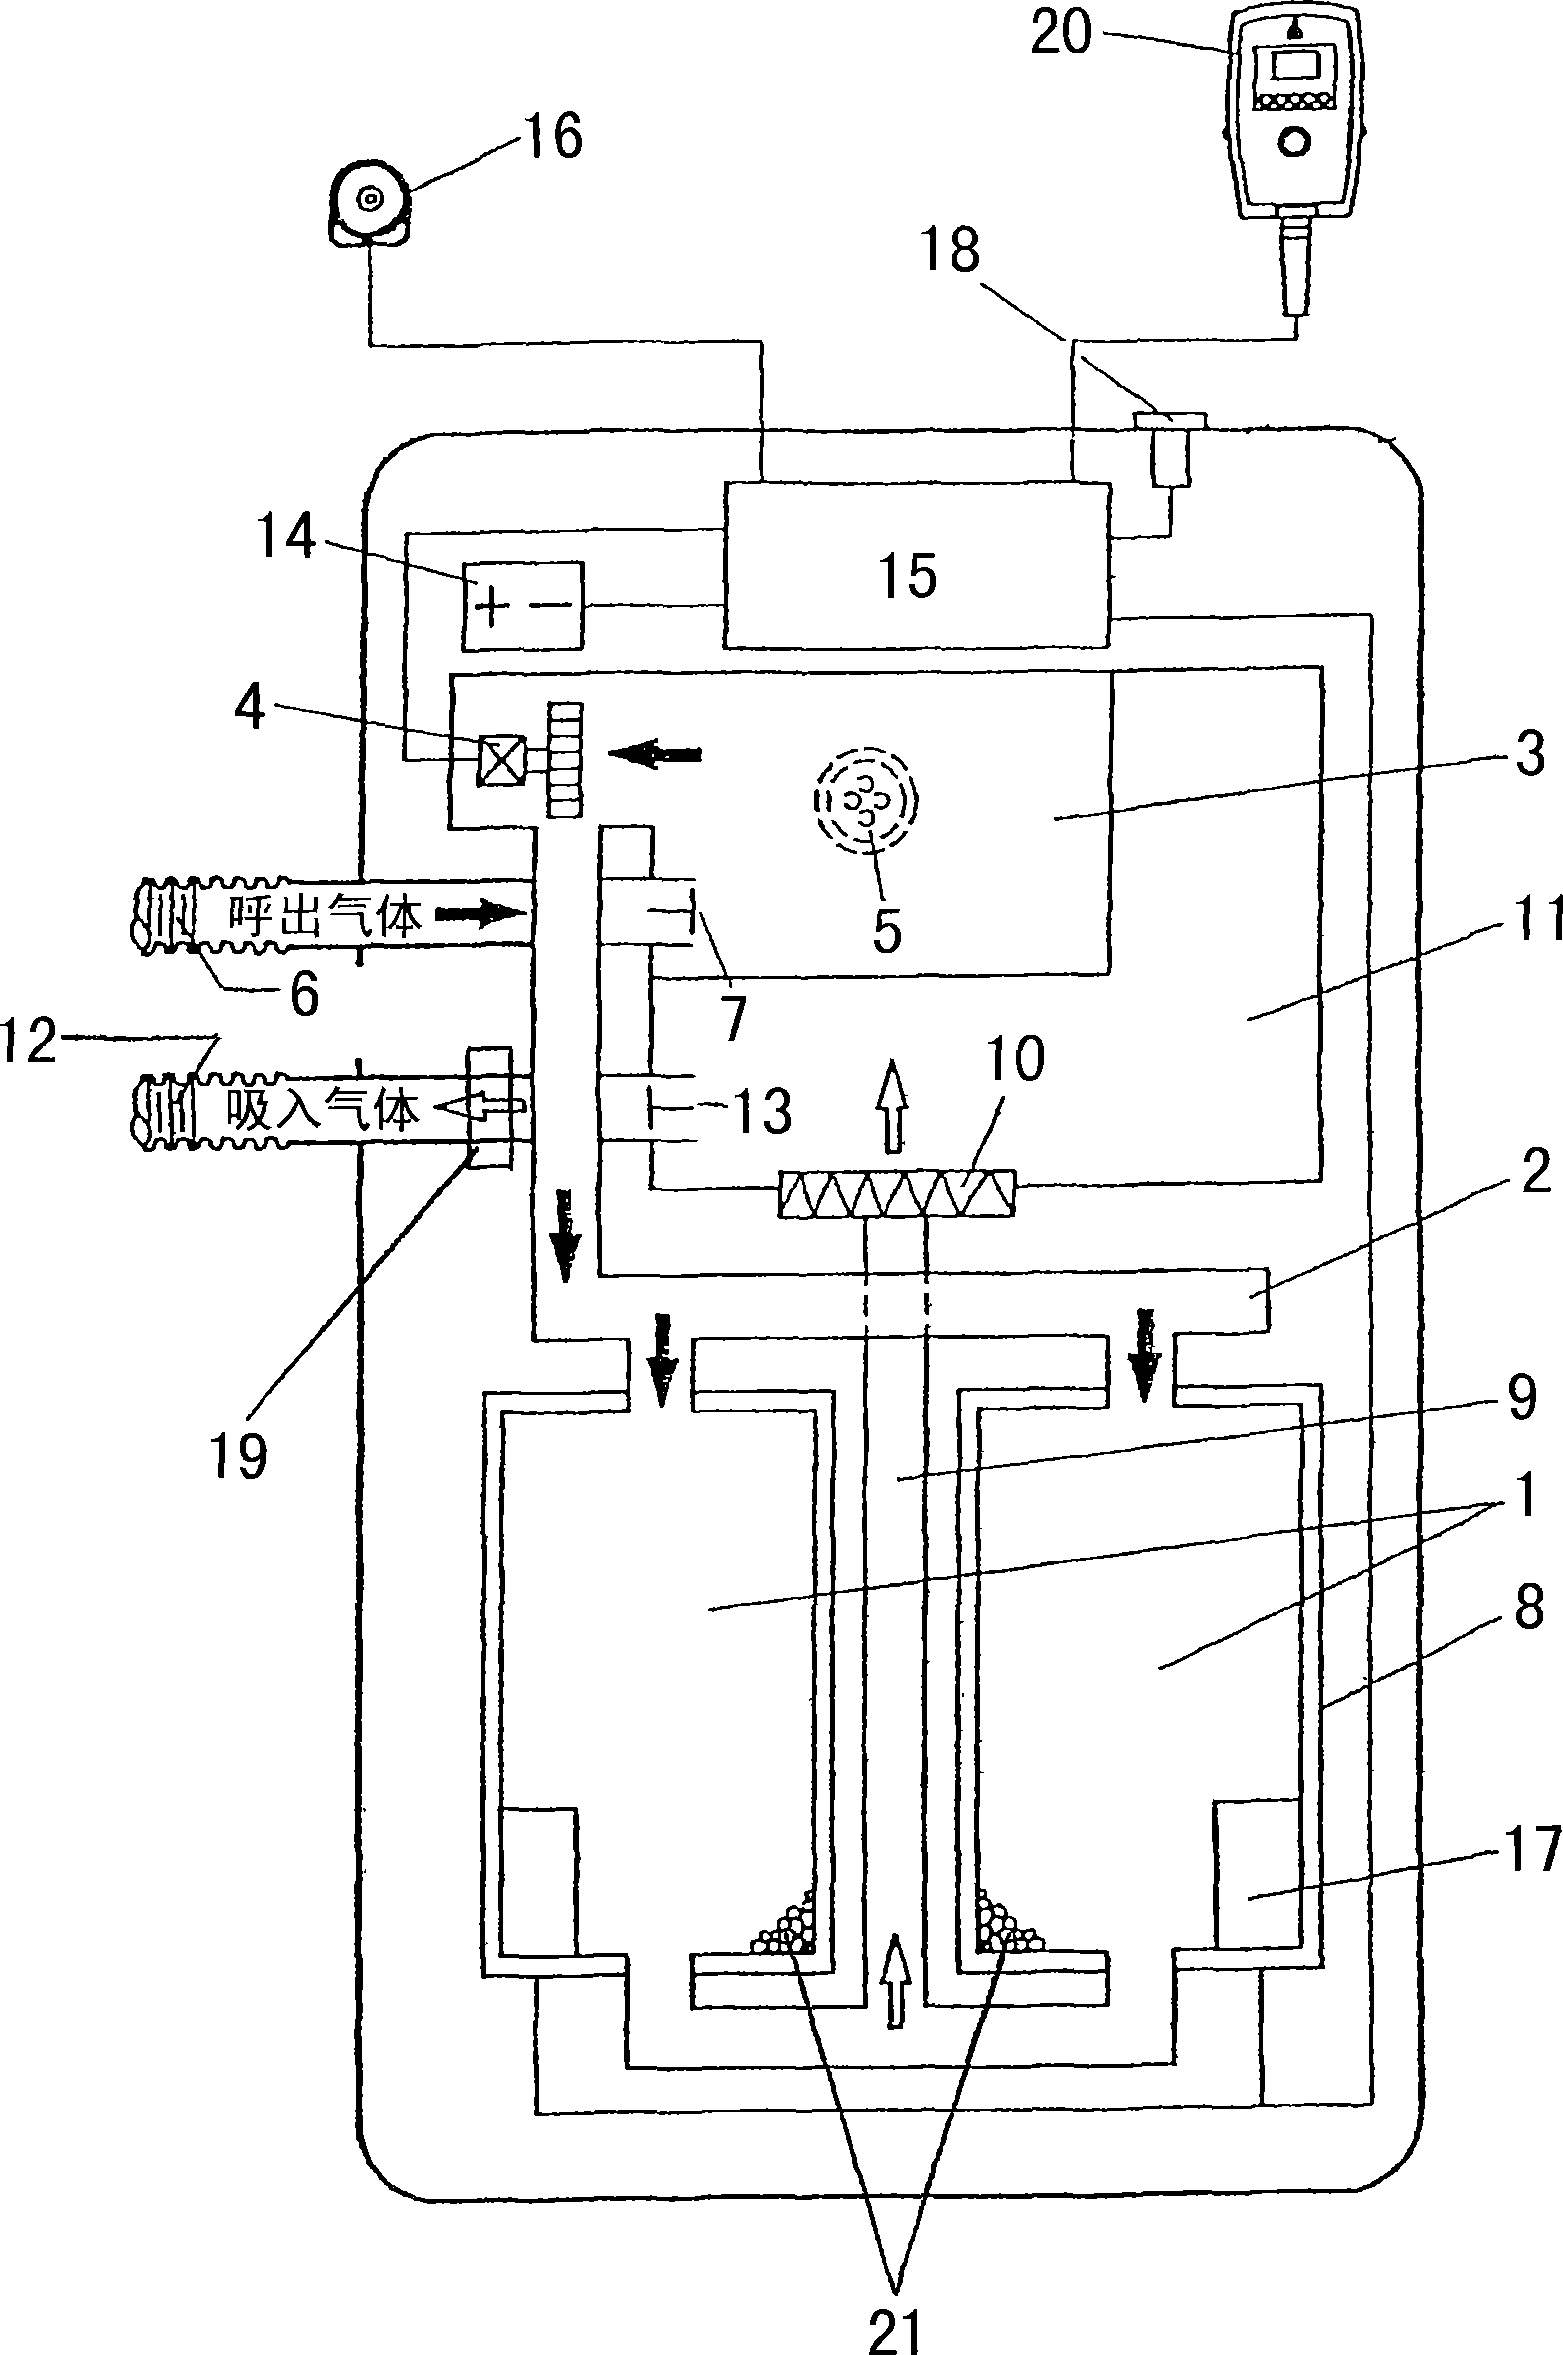 Method and arrangement for determination of the residual capacity of breathable air for an oxygen-generating breathing apparatus operated in circuit